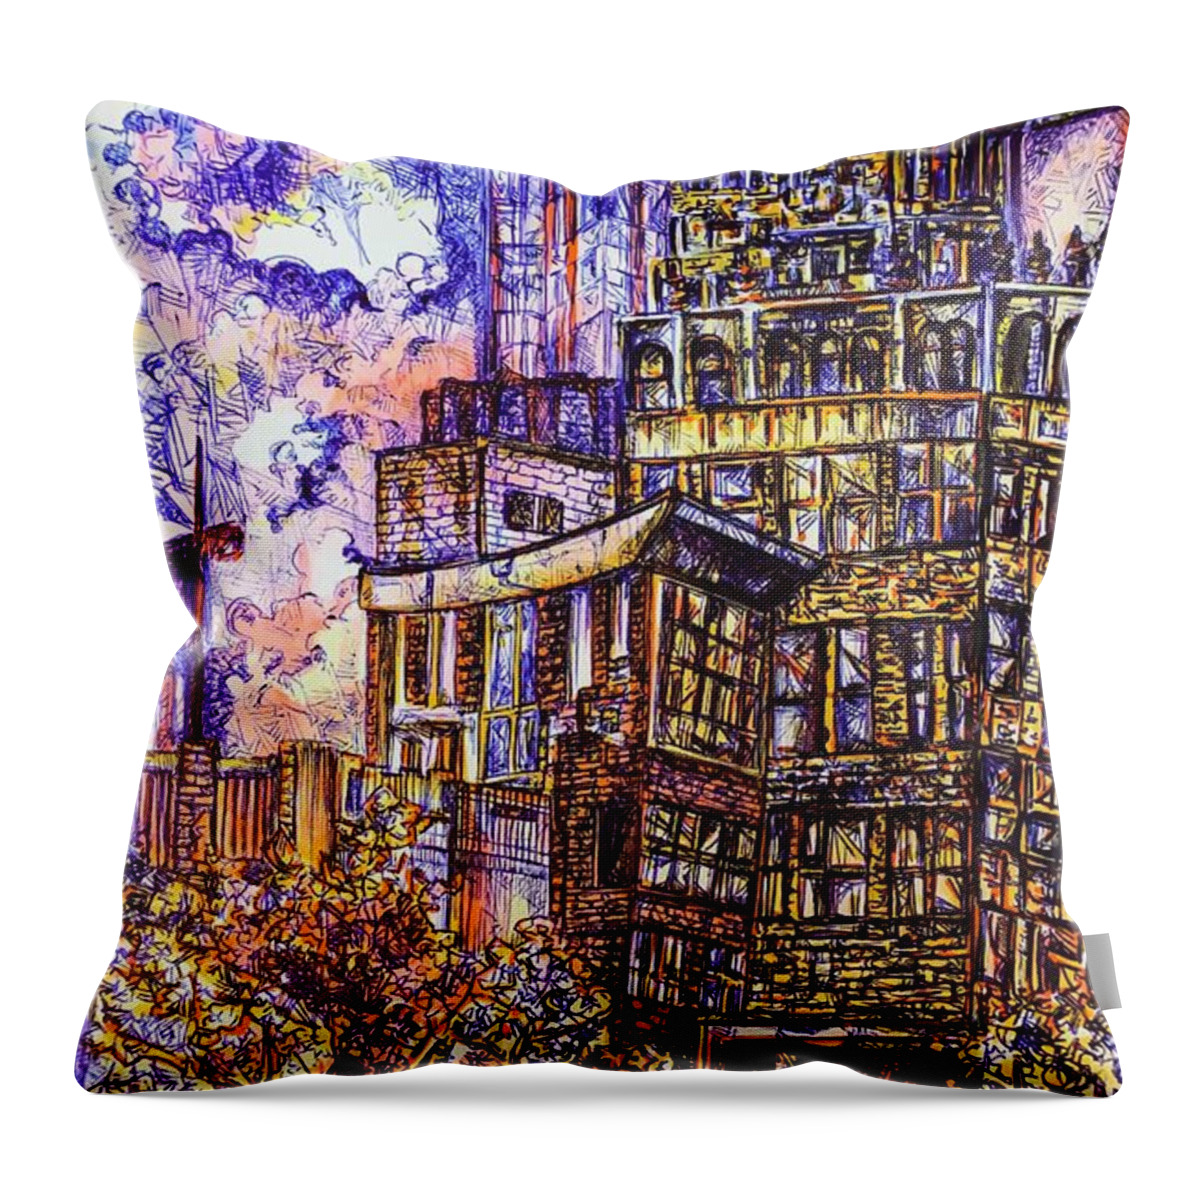 Urban Throw Pillow featuring the drawing Urban Twilight by Angela Weddle